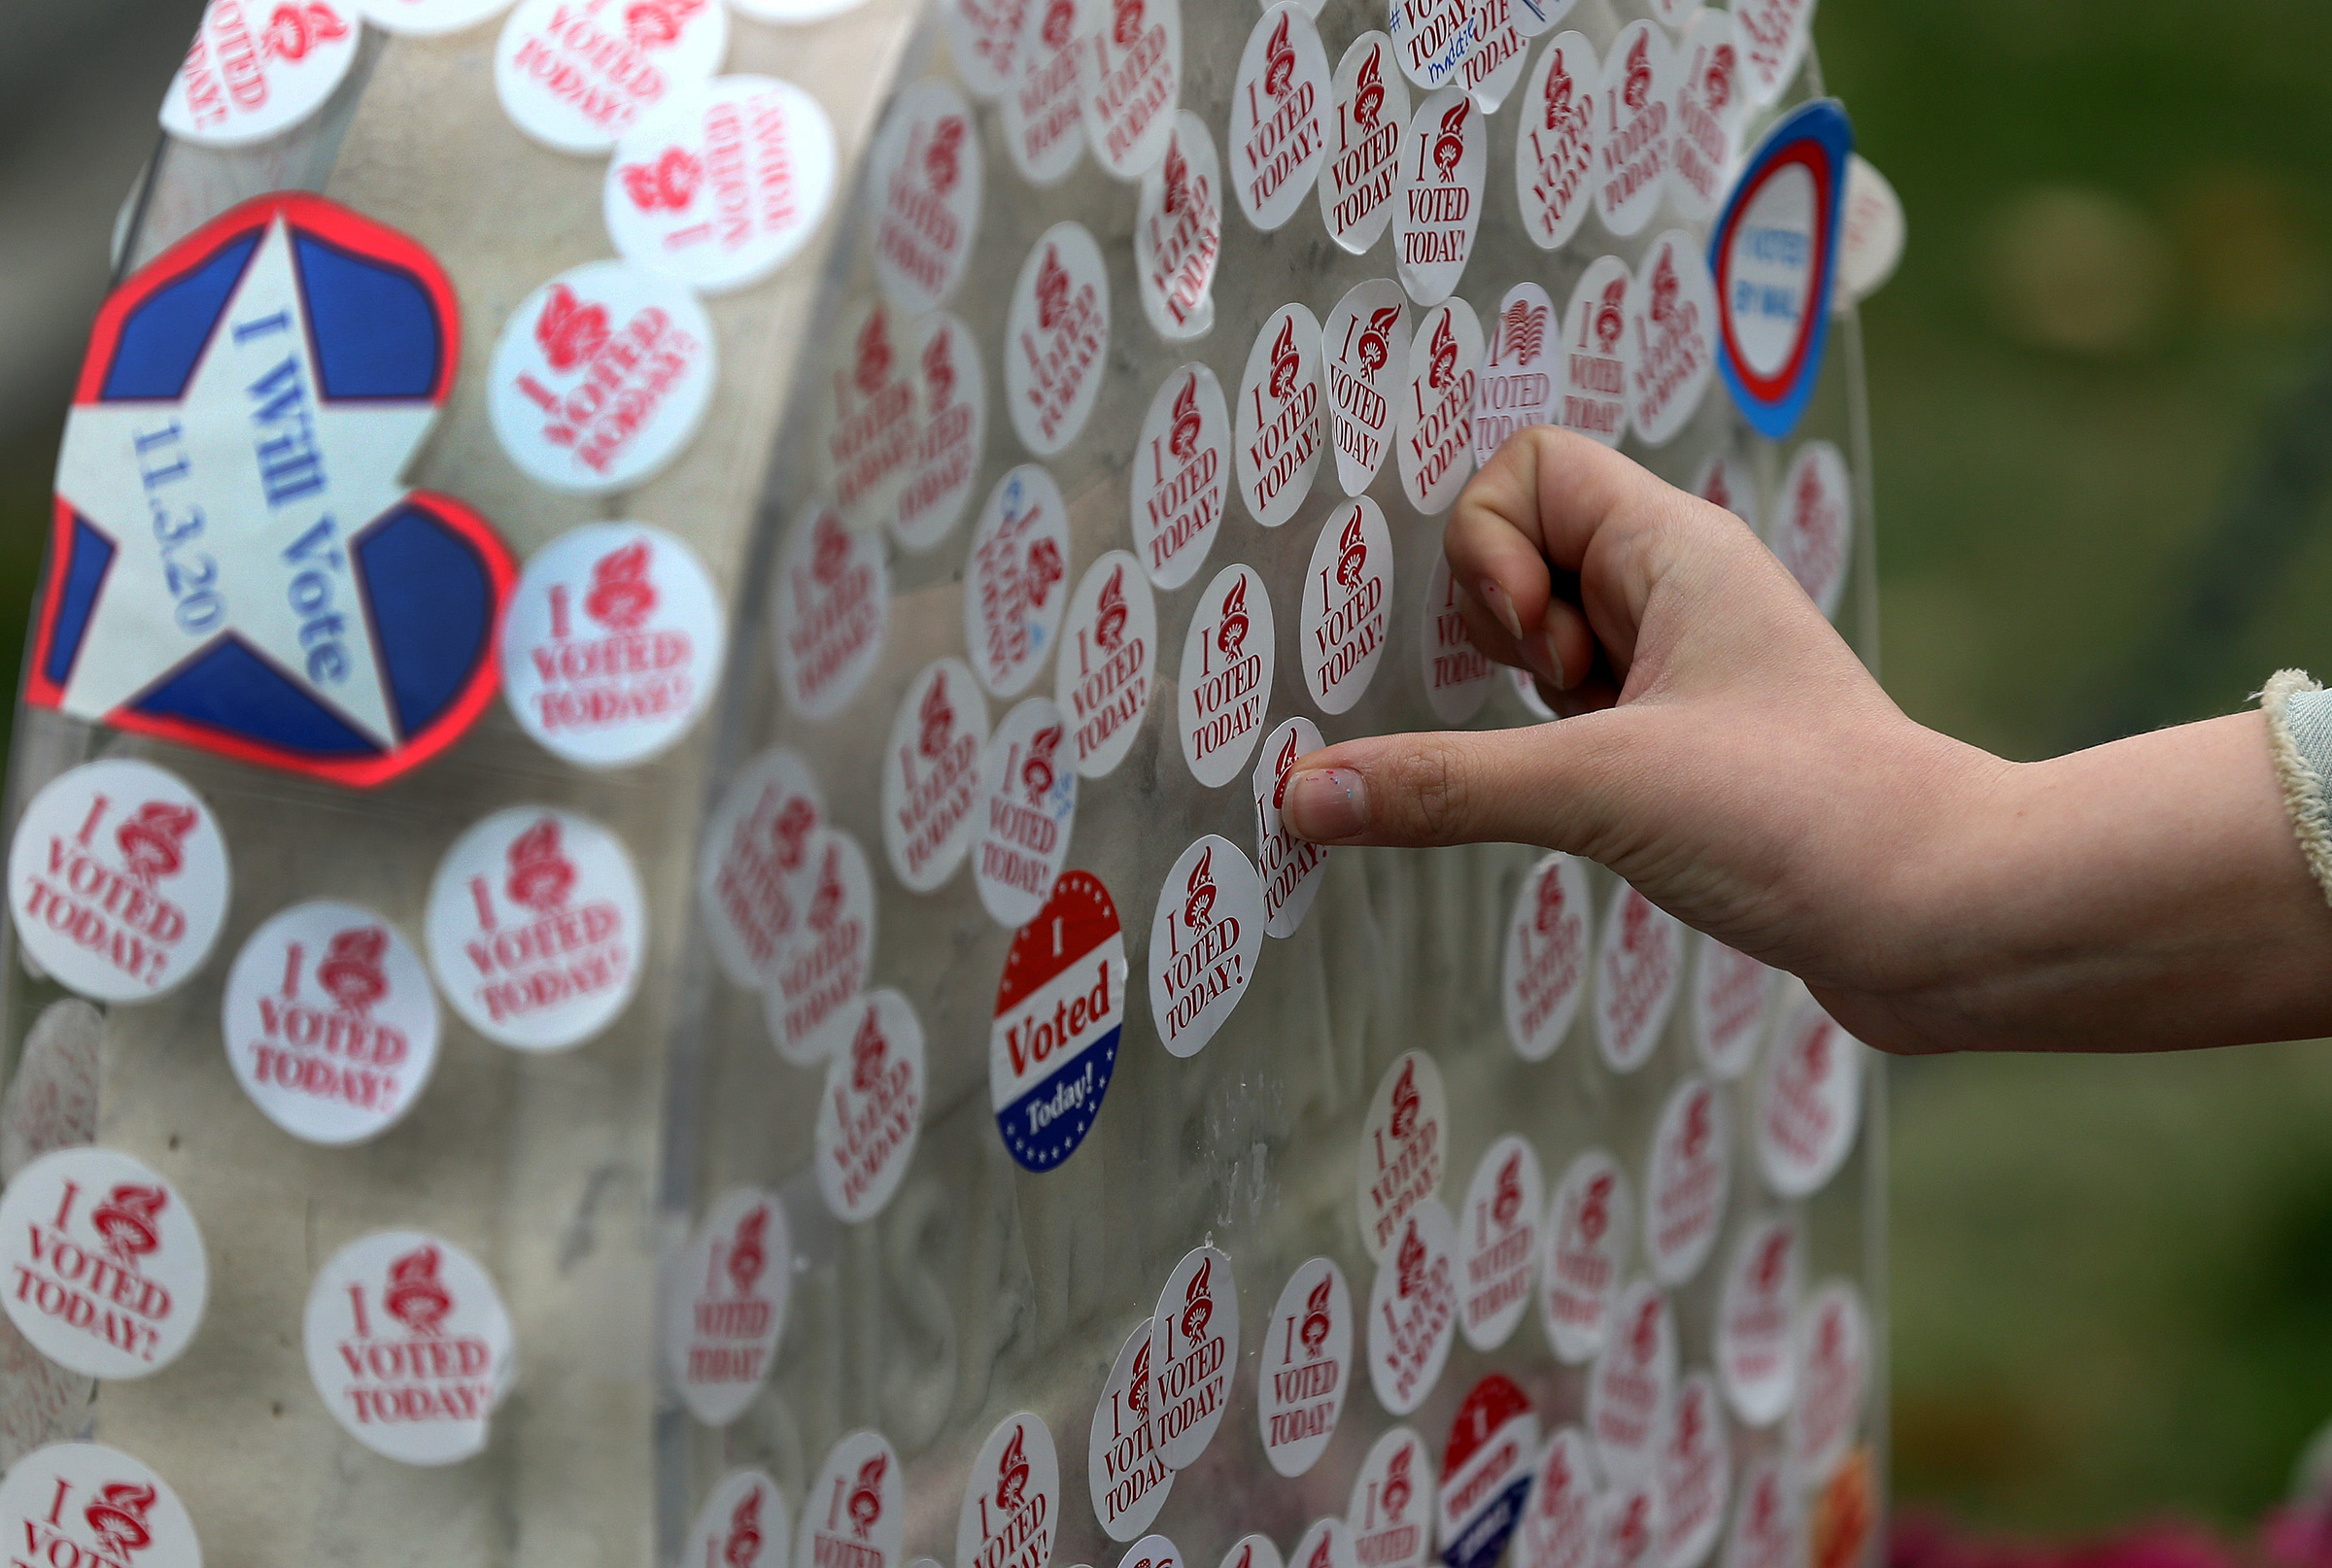 In an Election Day tradition, visitors place their "I Voted" stickers on the gravestone of Susan B. Anthony